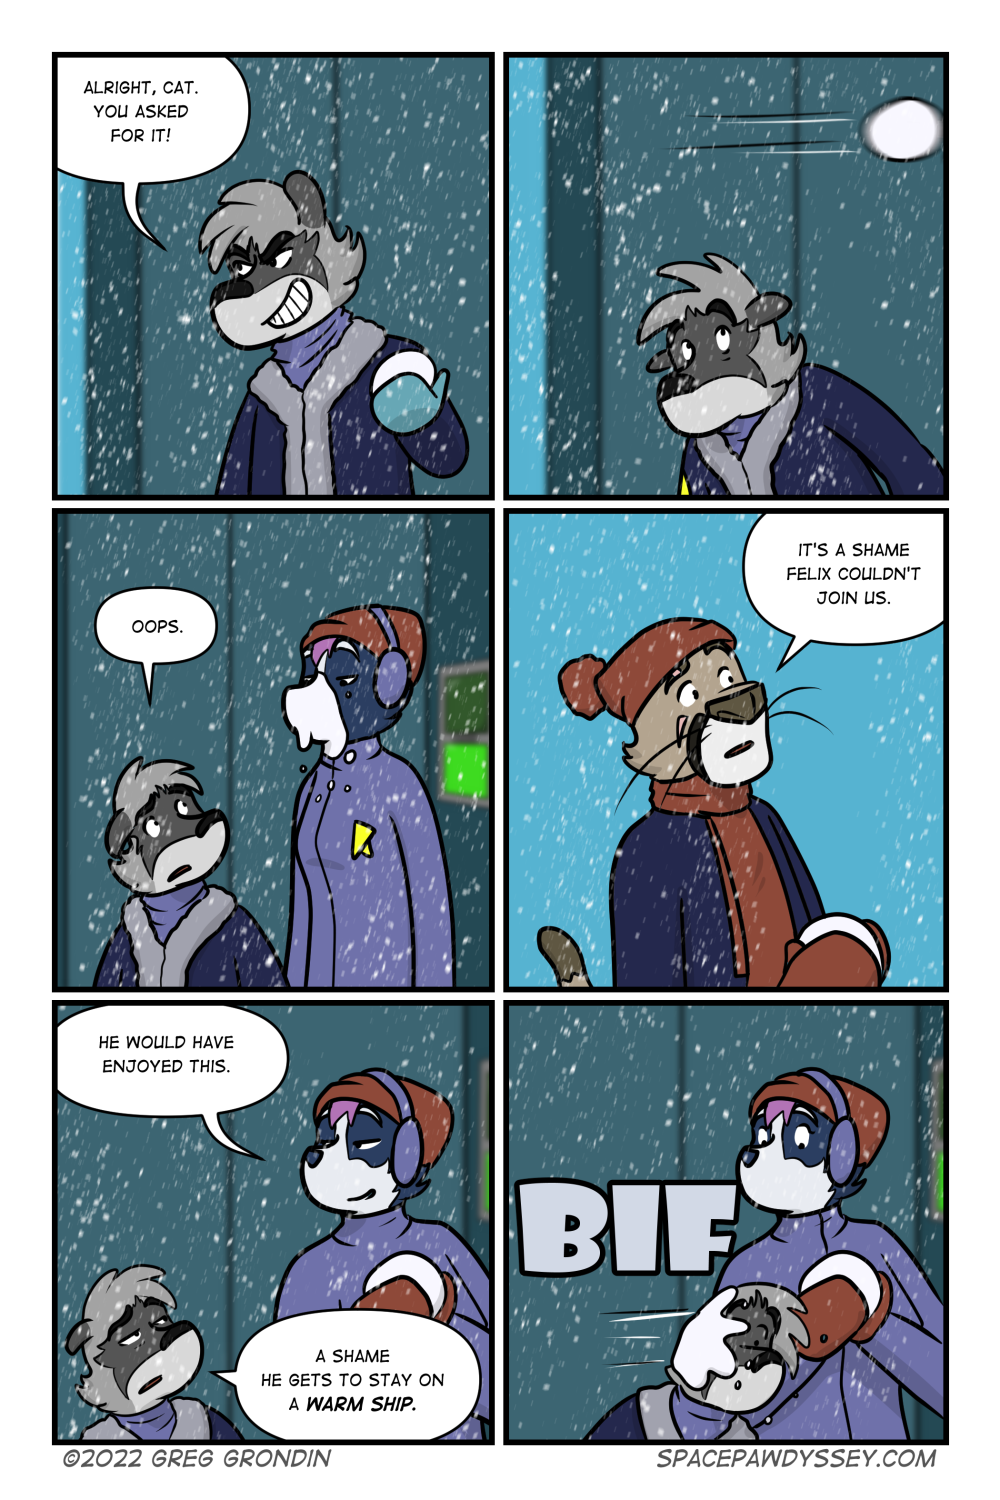 Space Pawdyssey #574